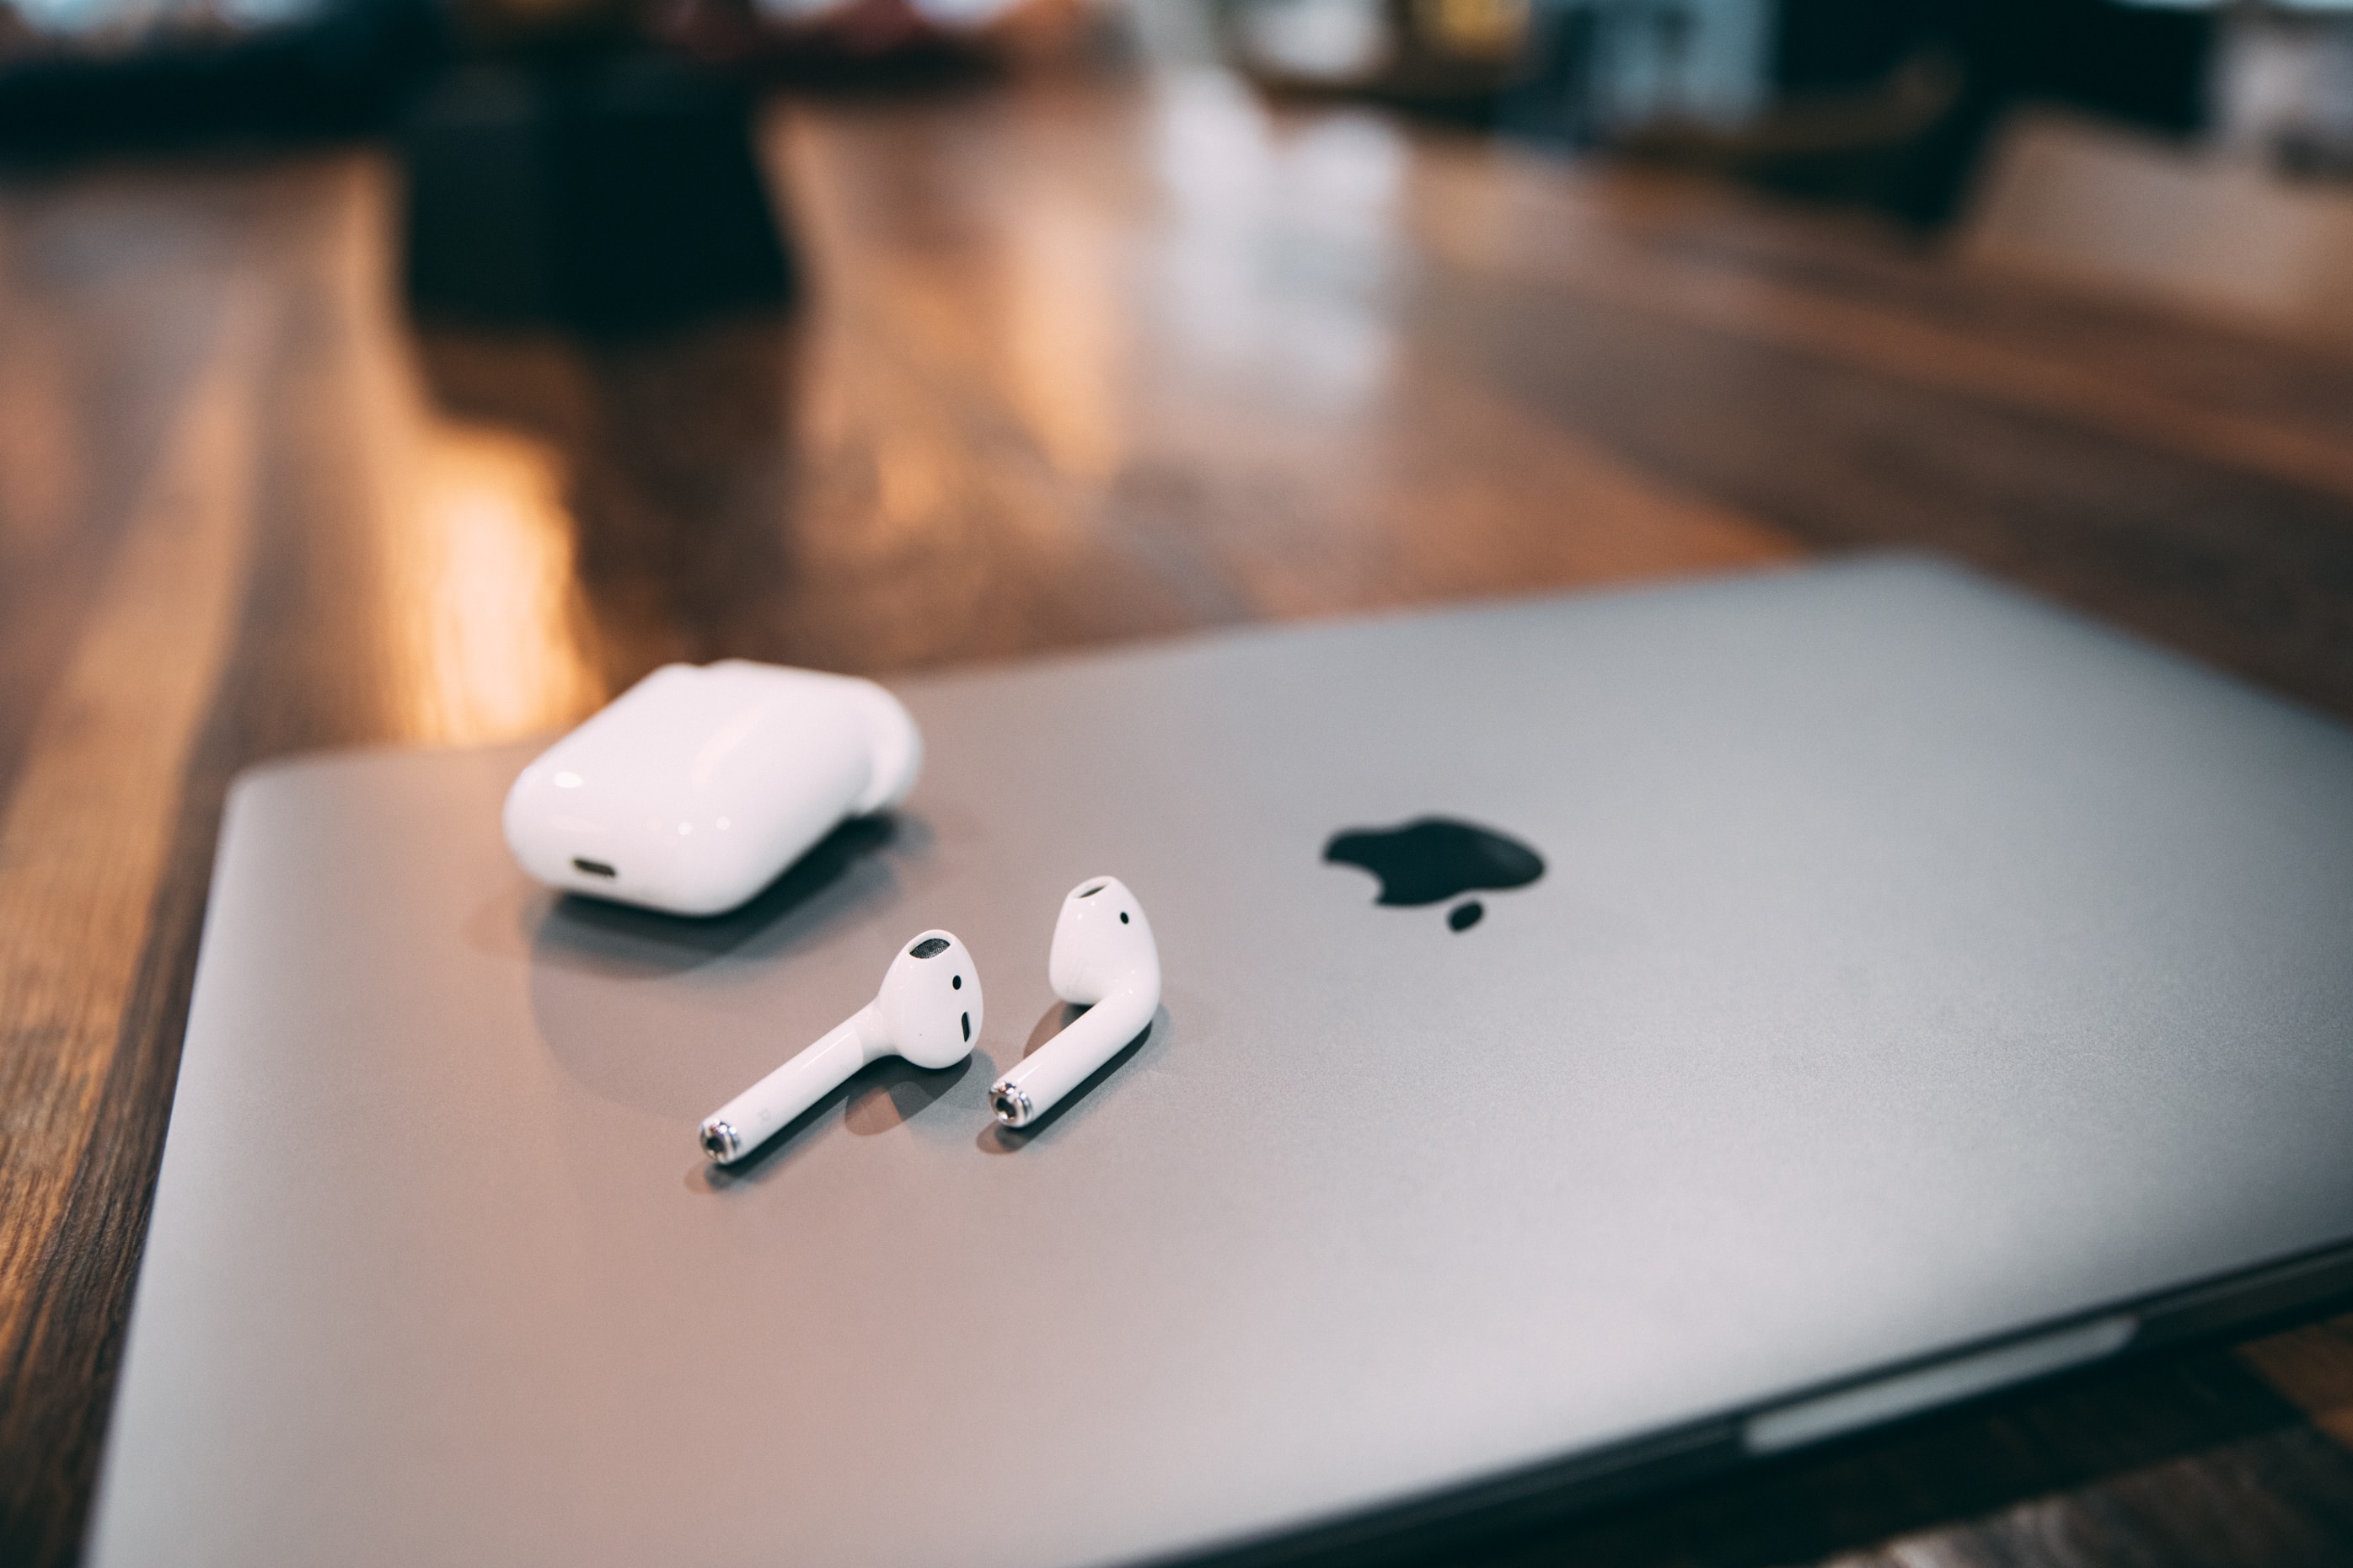 Apple AirPods shown resting on top of an Apple laptop